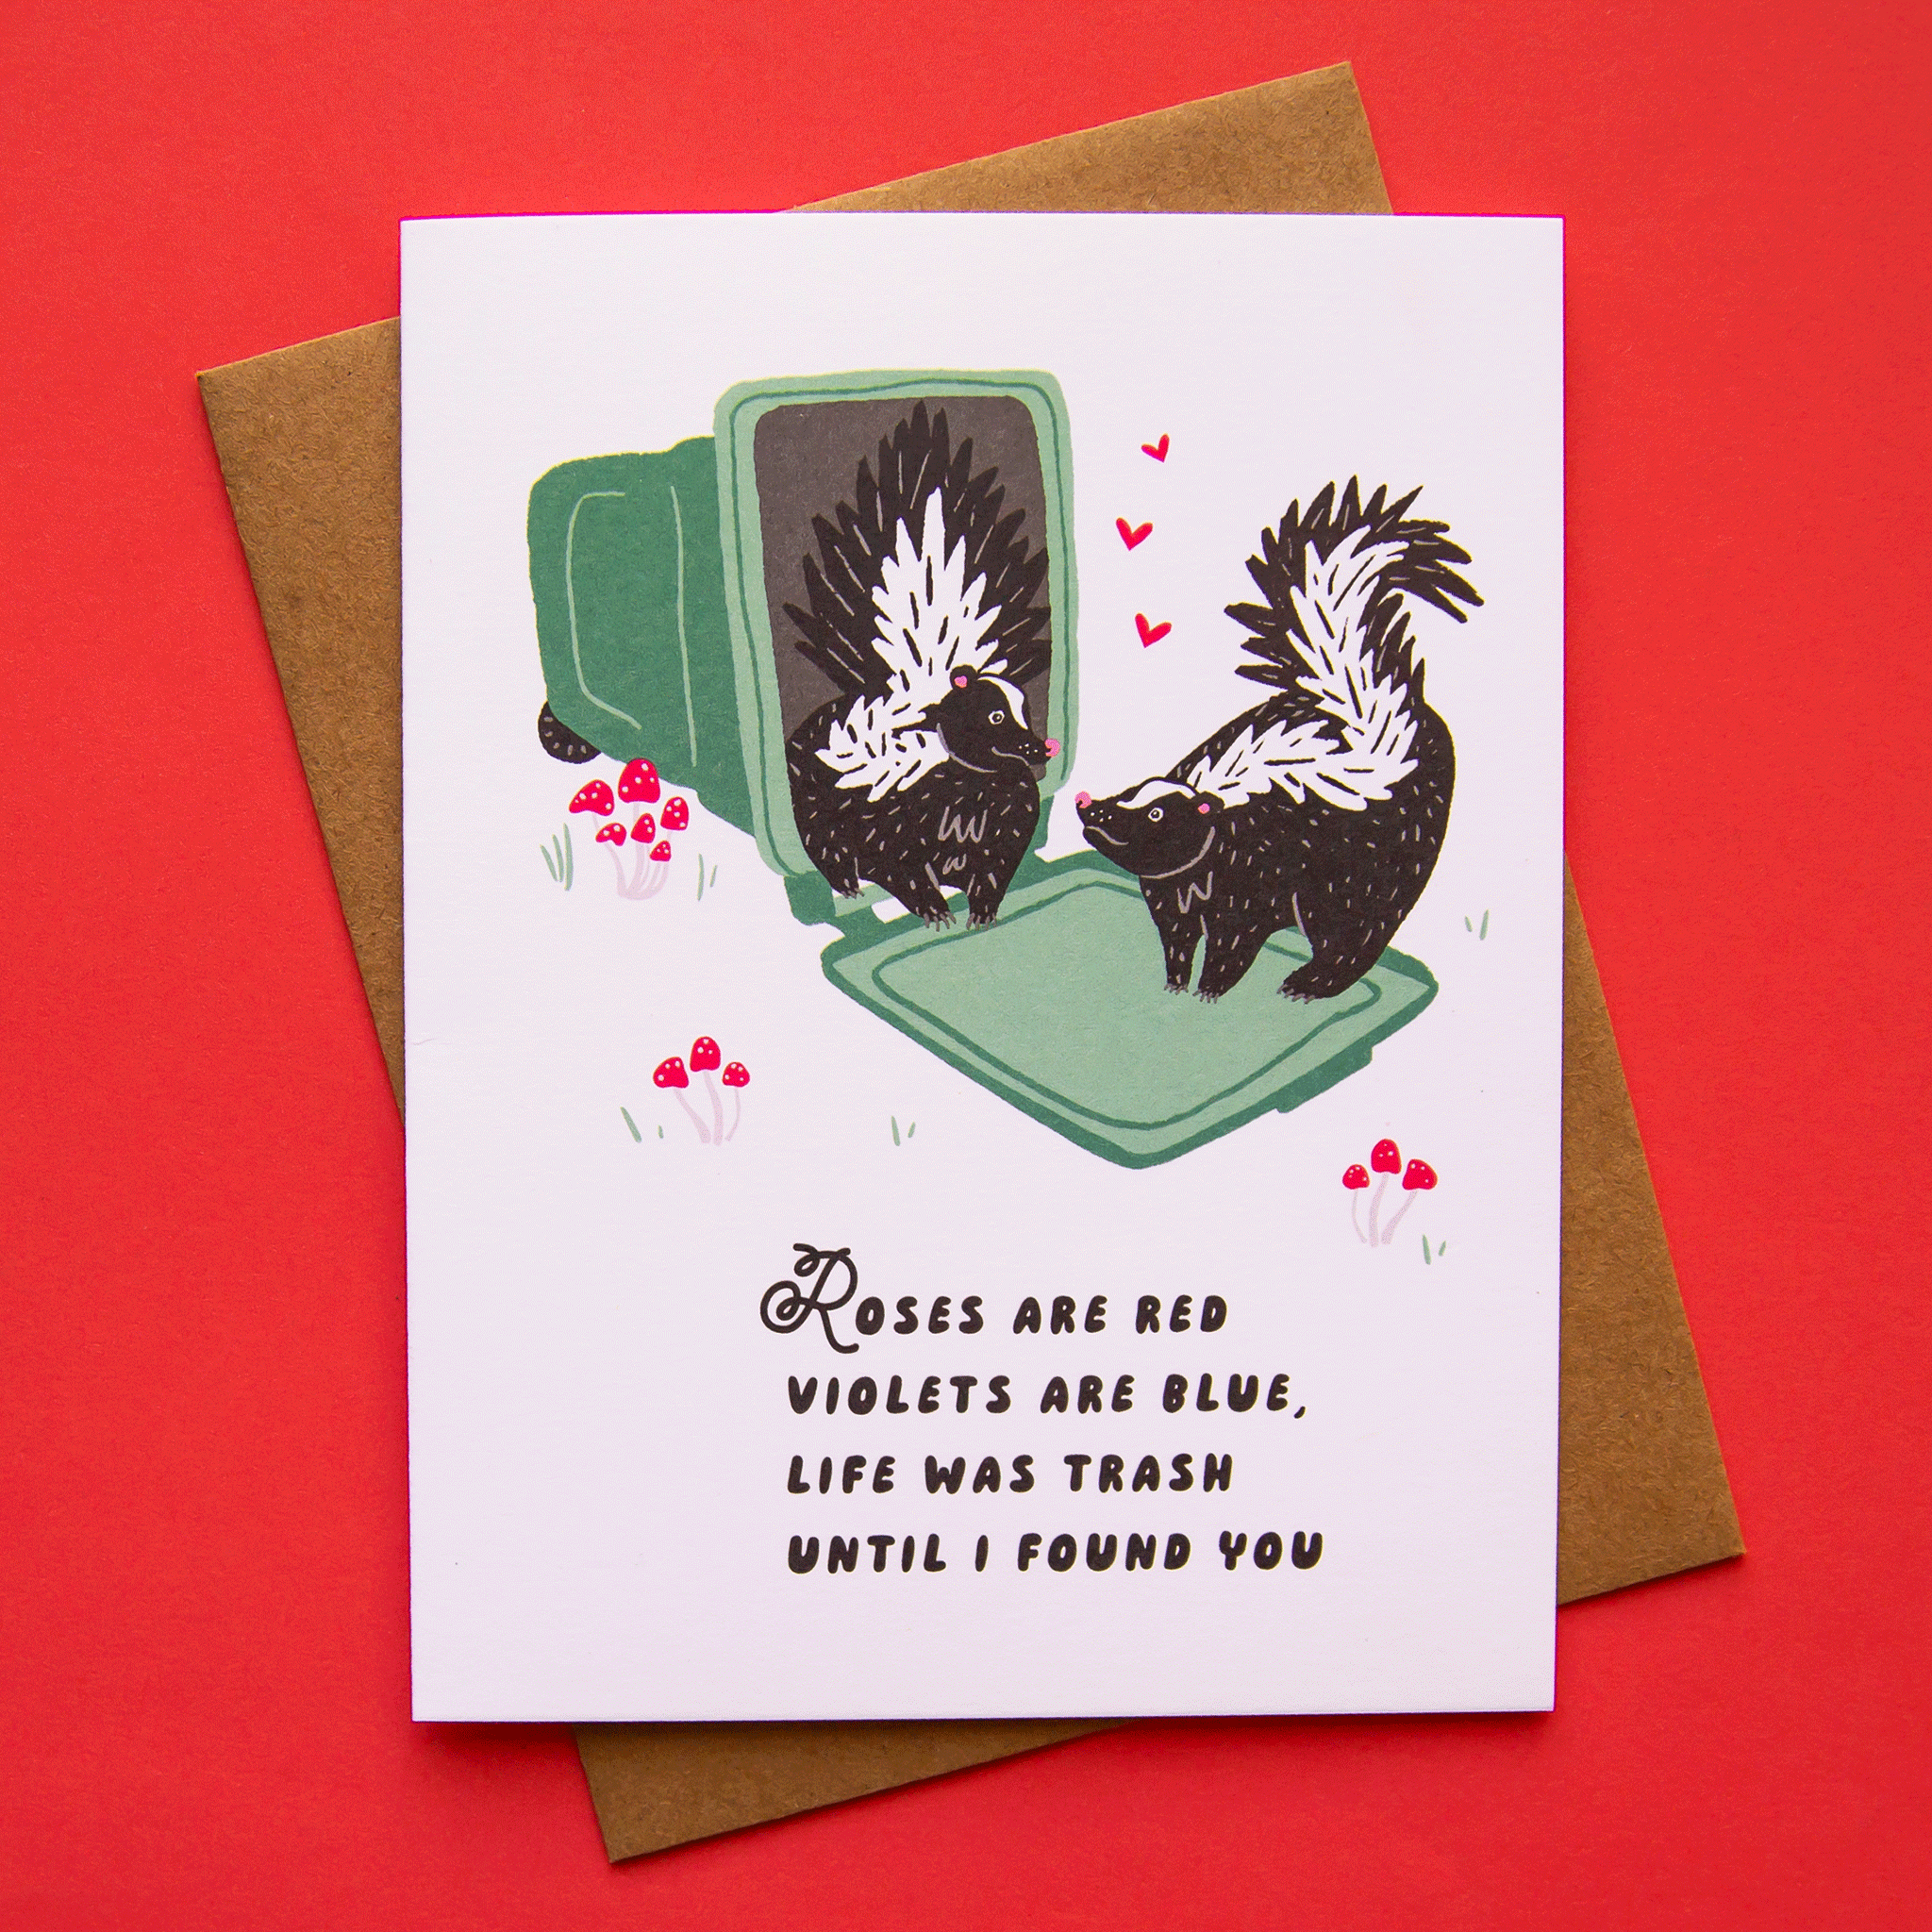 A white card with an illustration of two skunks standing on a tipped over garbage can with red mushrooms around them and pink hearts floating between along with black text on the bottom half that reads, "Roses are red, violets are blue, life was trash until I found you".